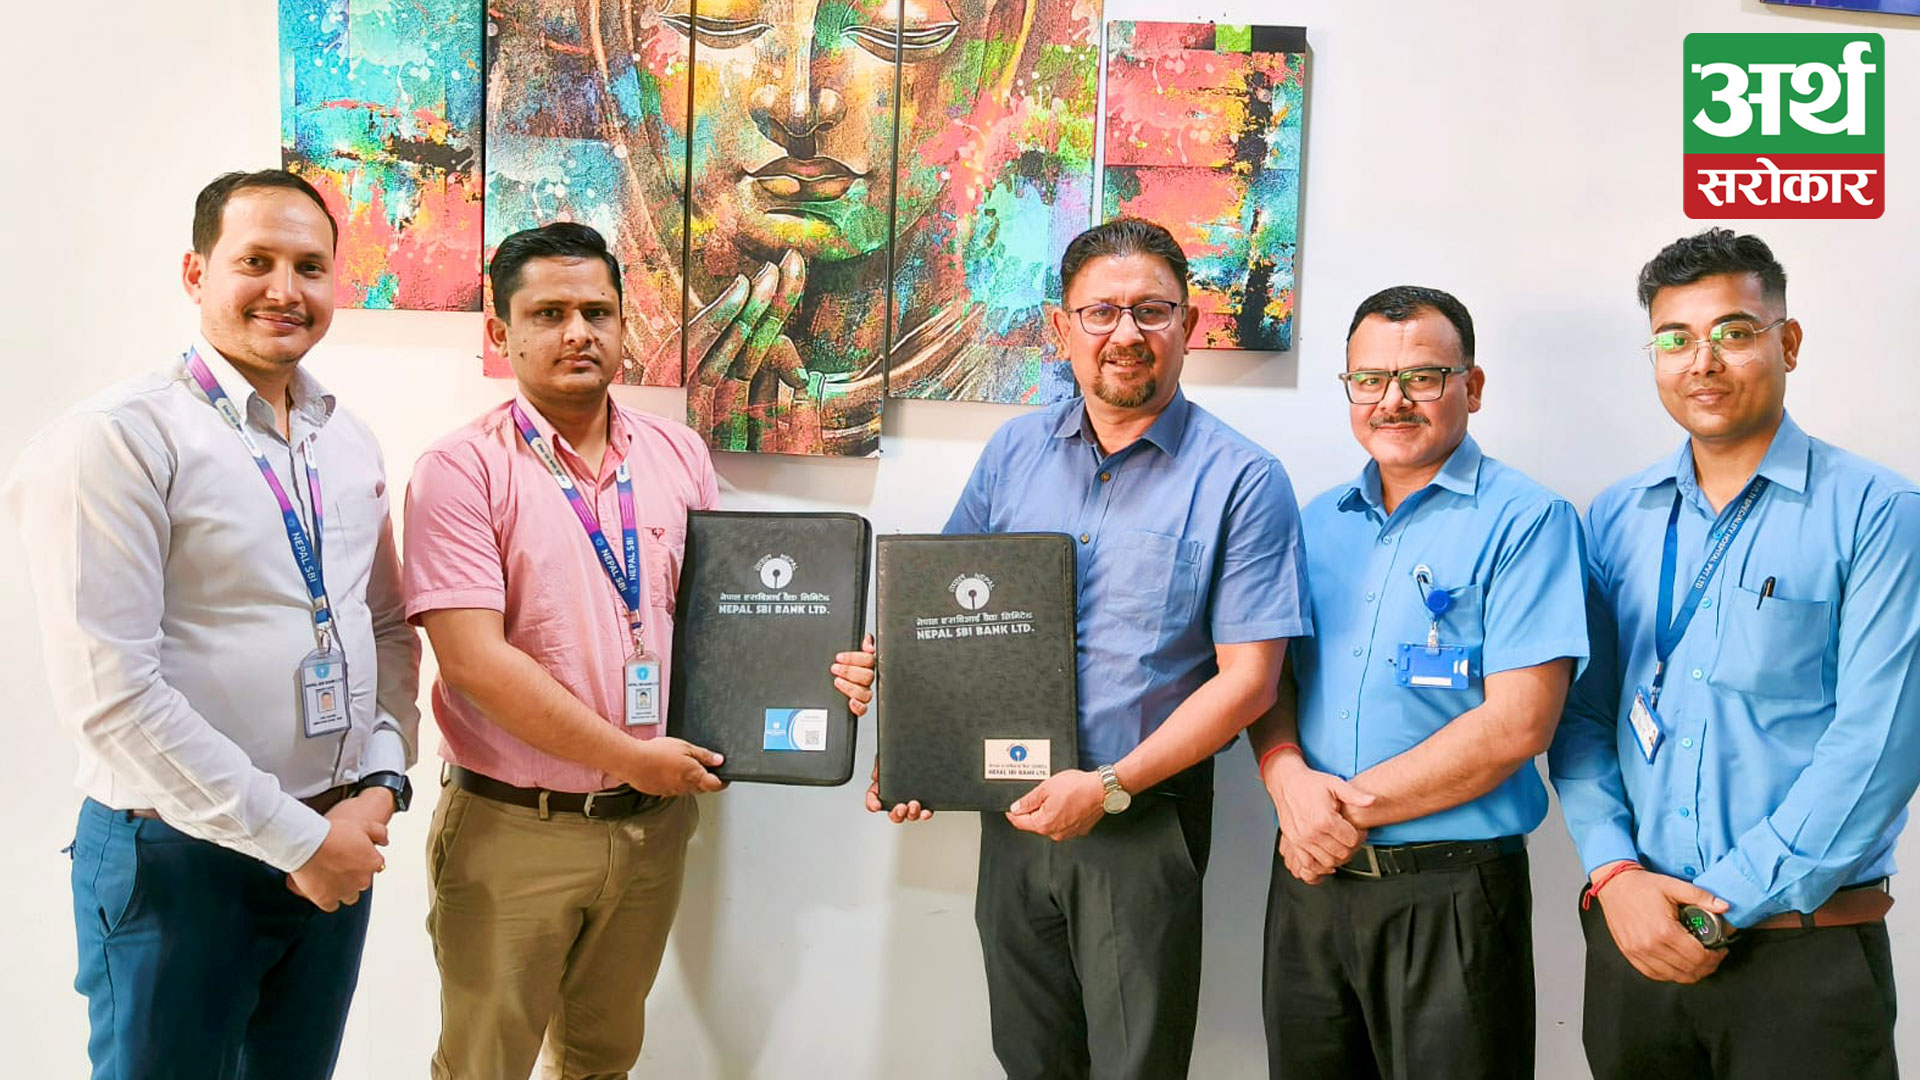 Nepal SBI Bank Partners with Neuro Hospital for Exclusive Healthcare Discounts